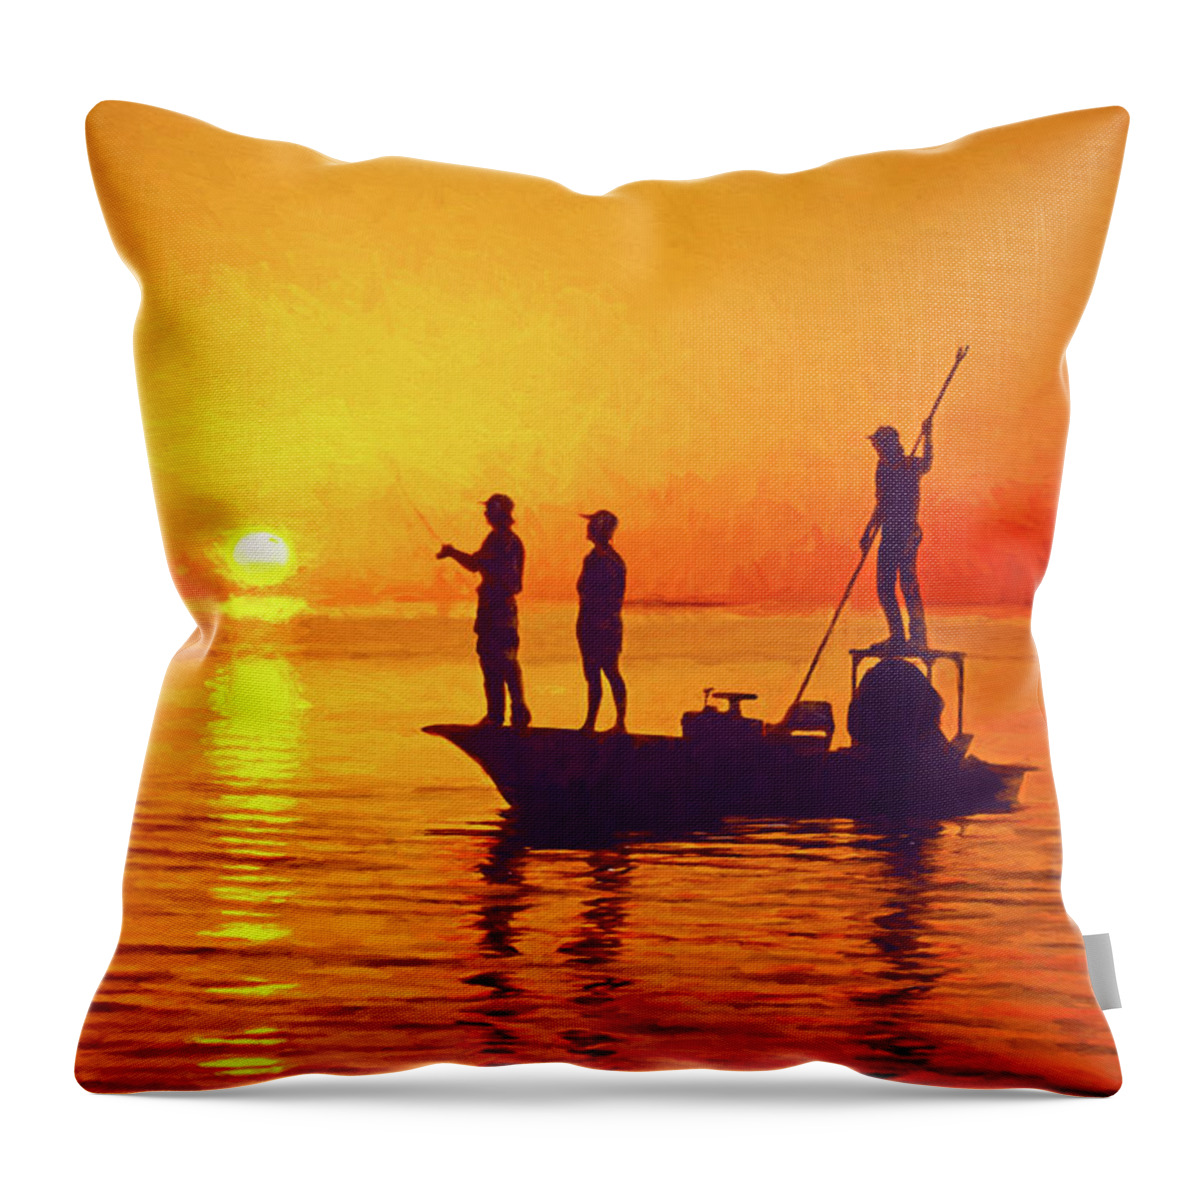 Fly Fishing Throw Pillow featuring the mixed media Florida Keys Fly Fishing by Dennis Cox Photo Explorer